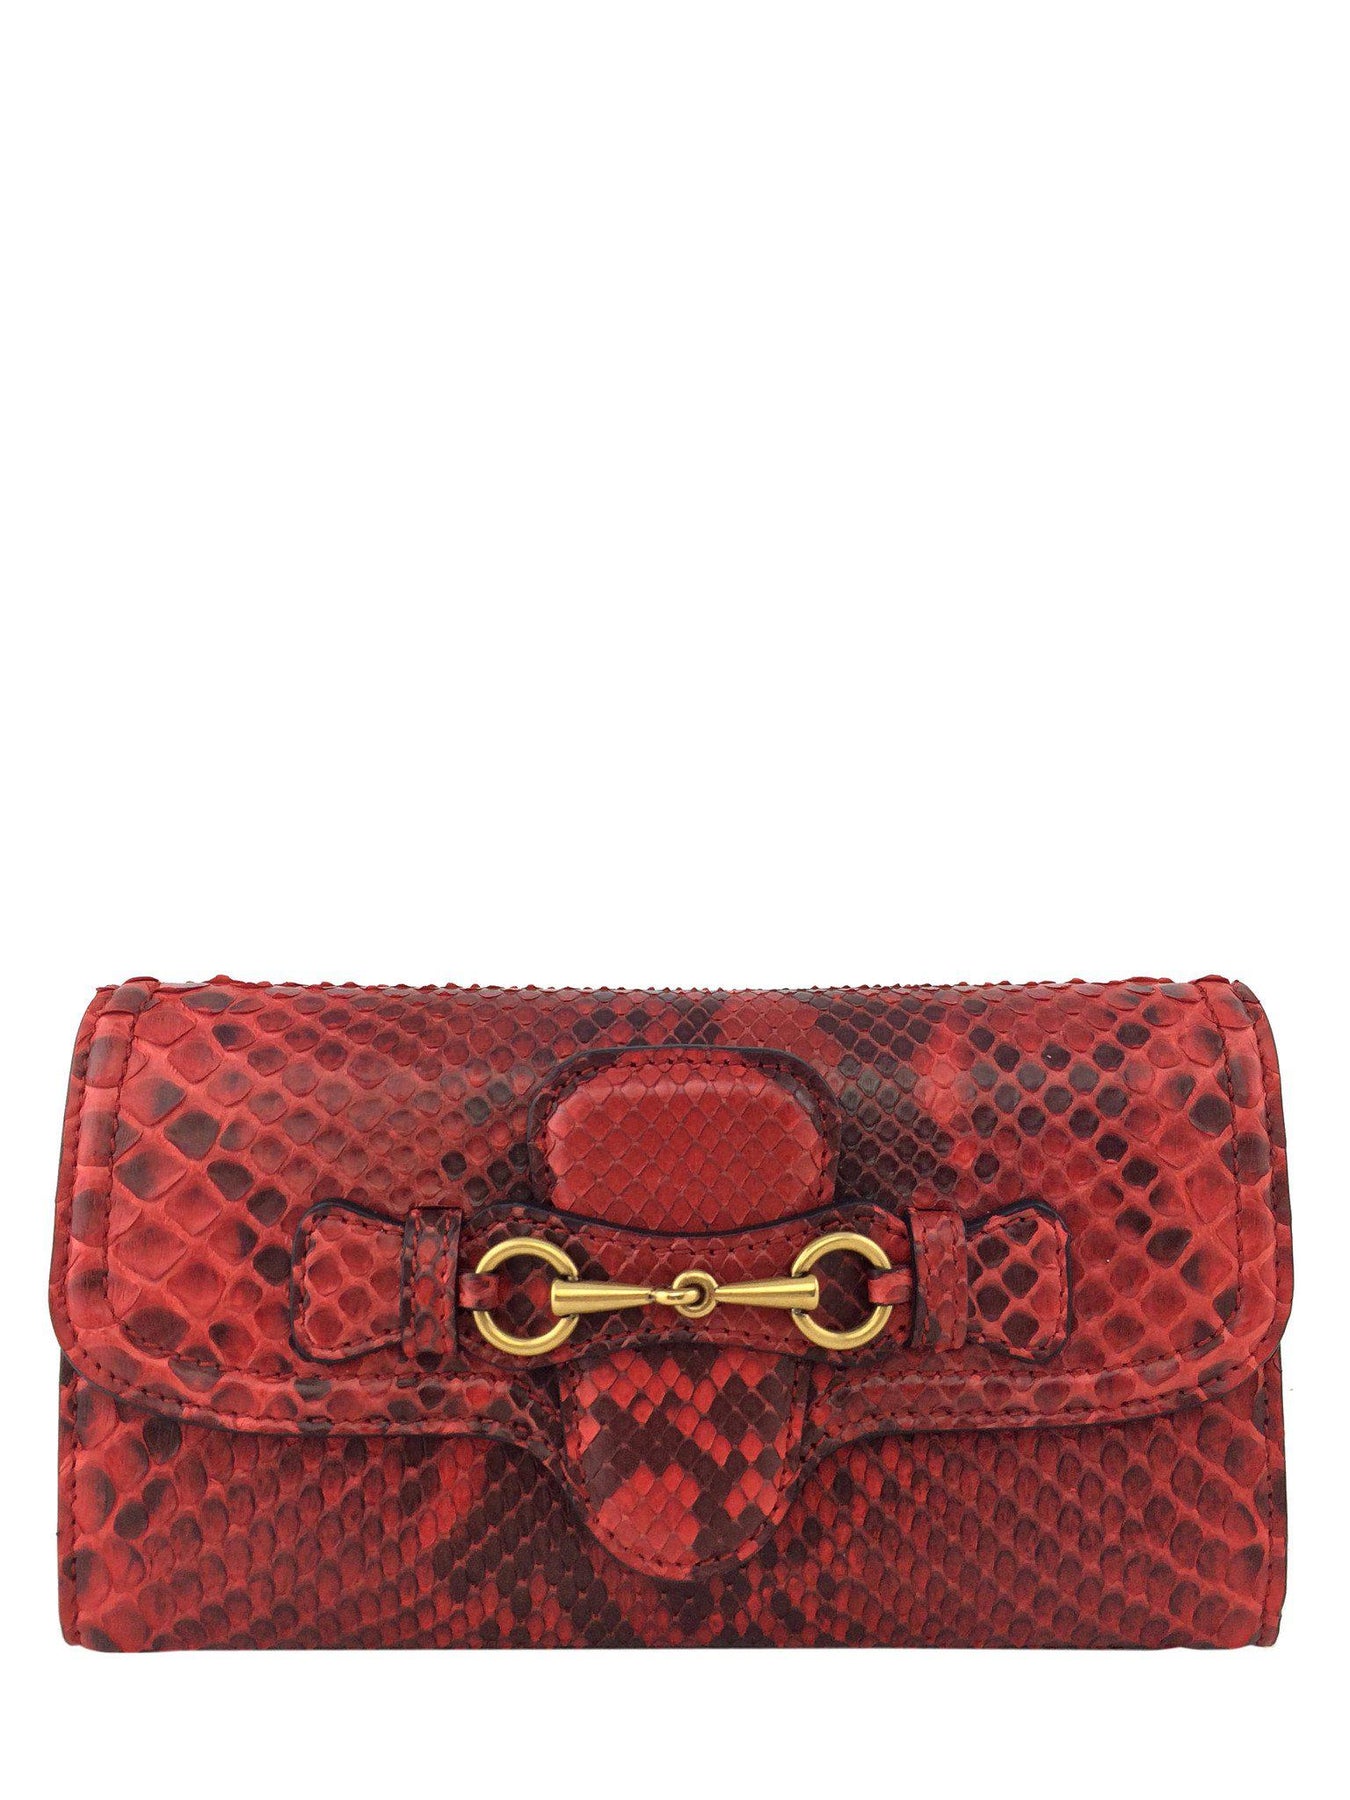 Gucci Lady Web Python Continental Wallet - Consigned Designs ...